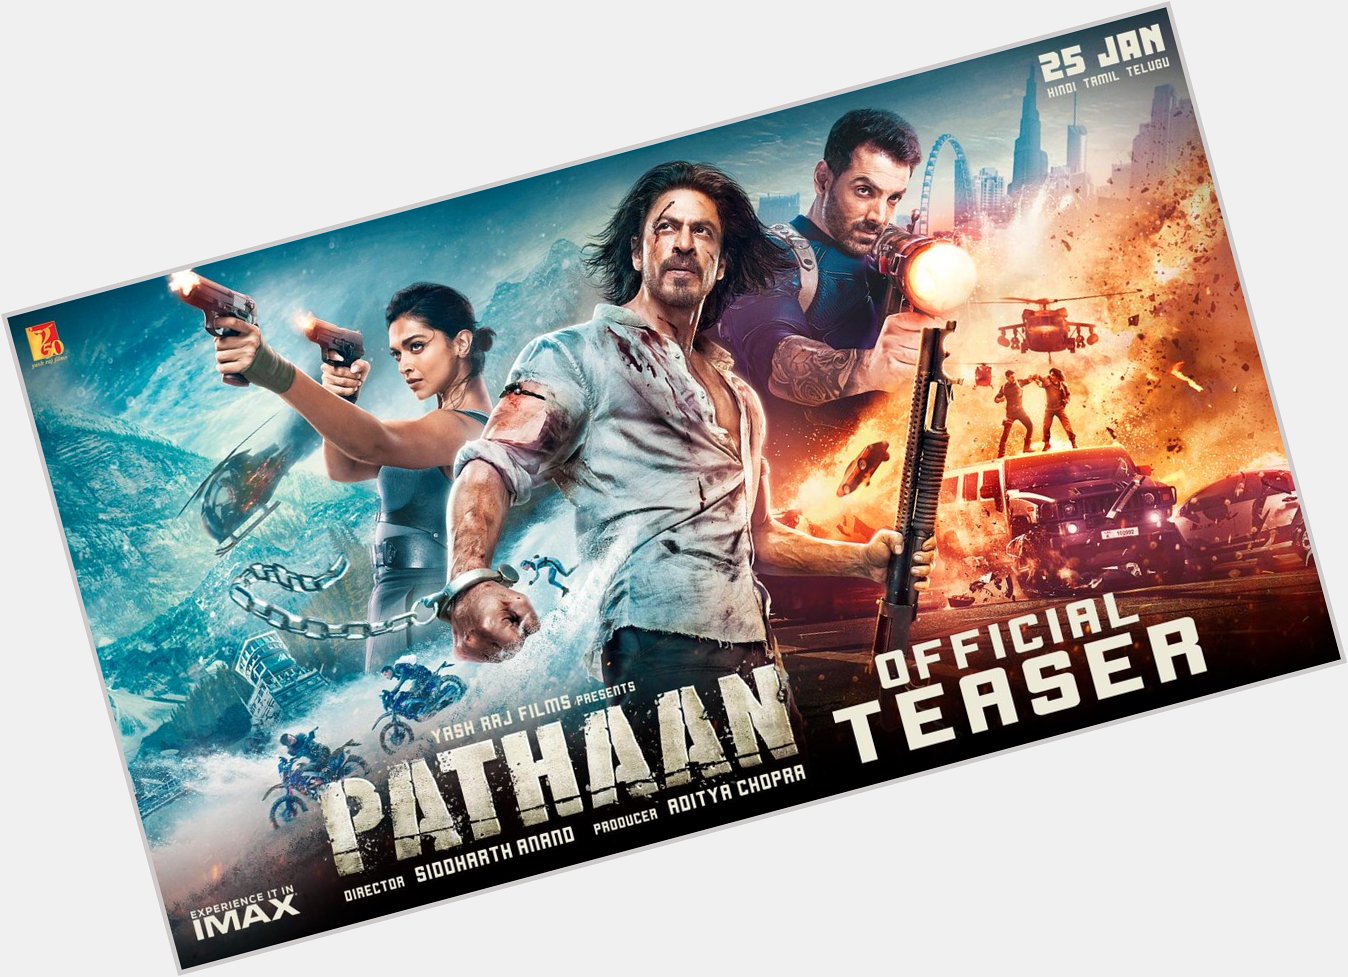 What a trailer man Panthan is going to be banger....
And Happy Birthday Shahrukh Khan......  